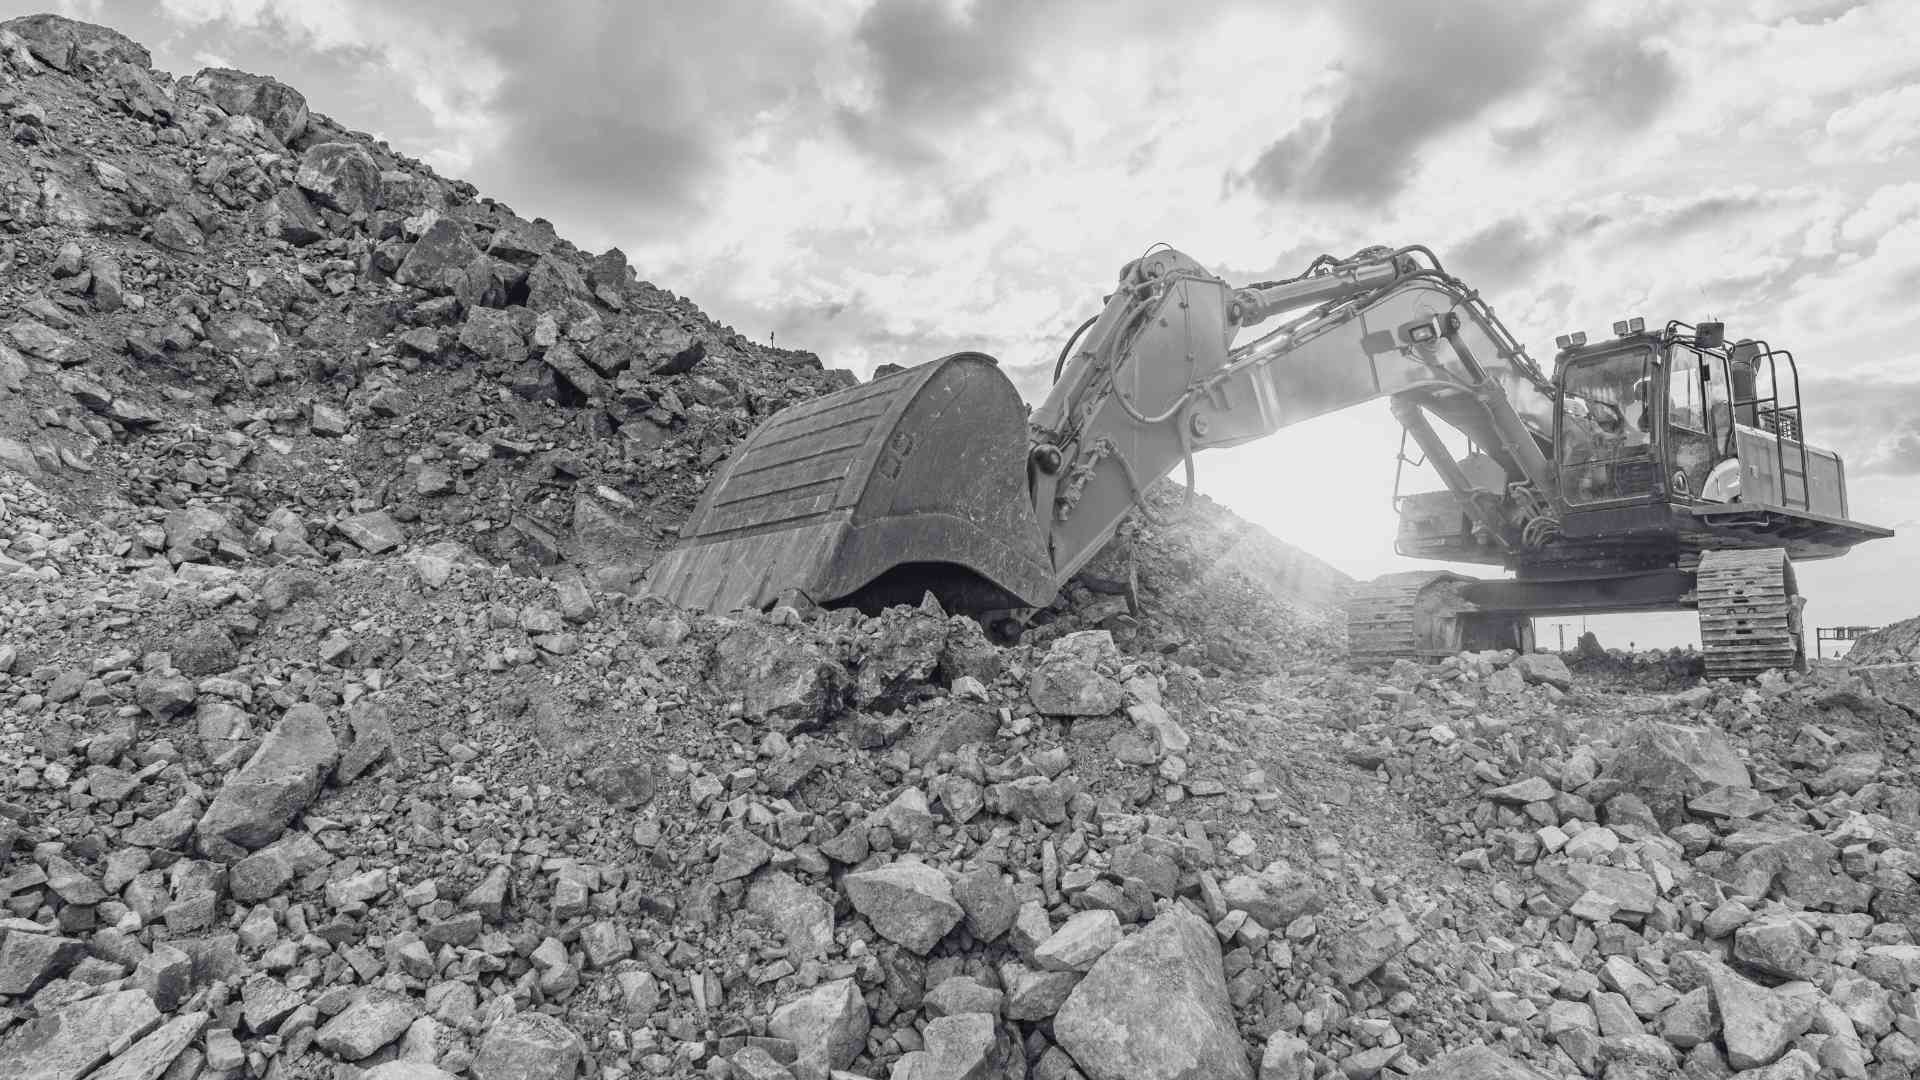 Excavator scooping rubble on a work site